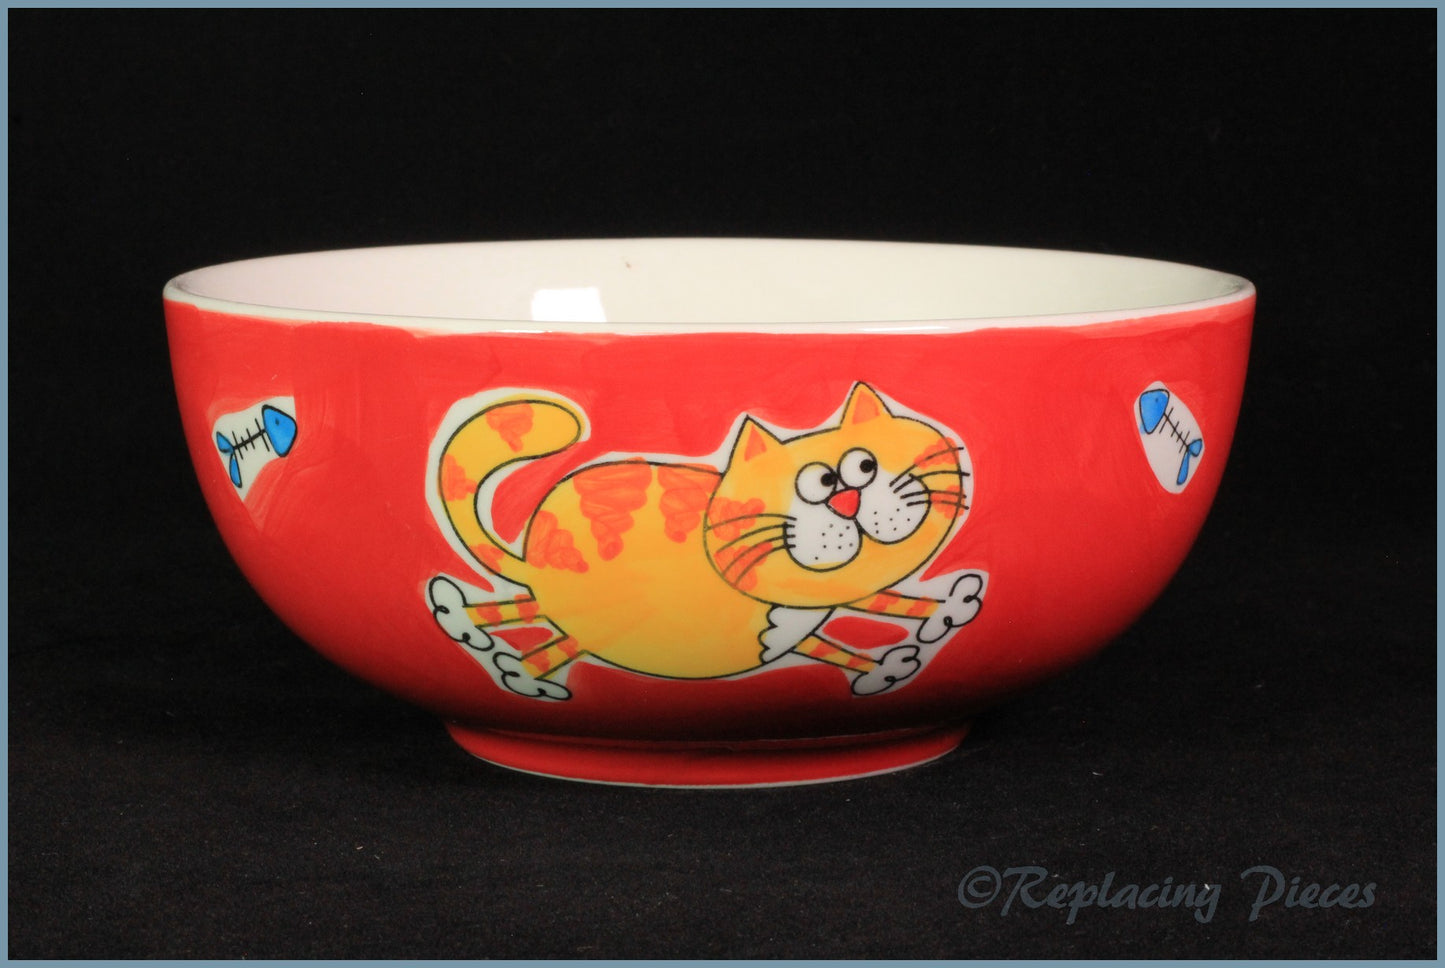 Whittards - Cereal Bowl (Cat & Fish)